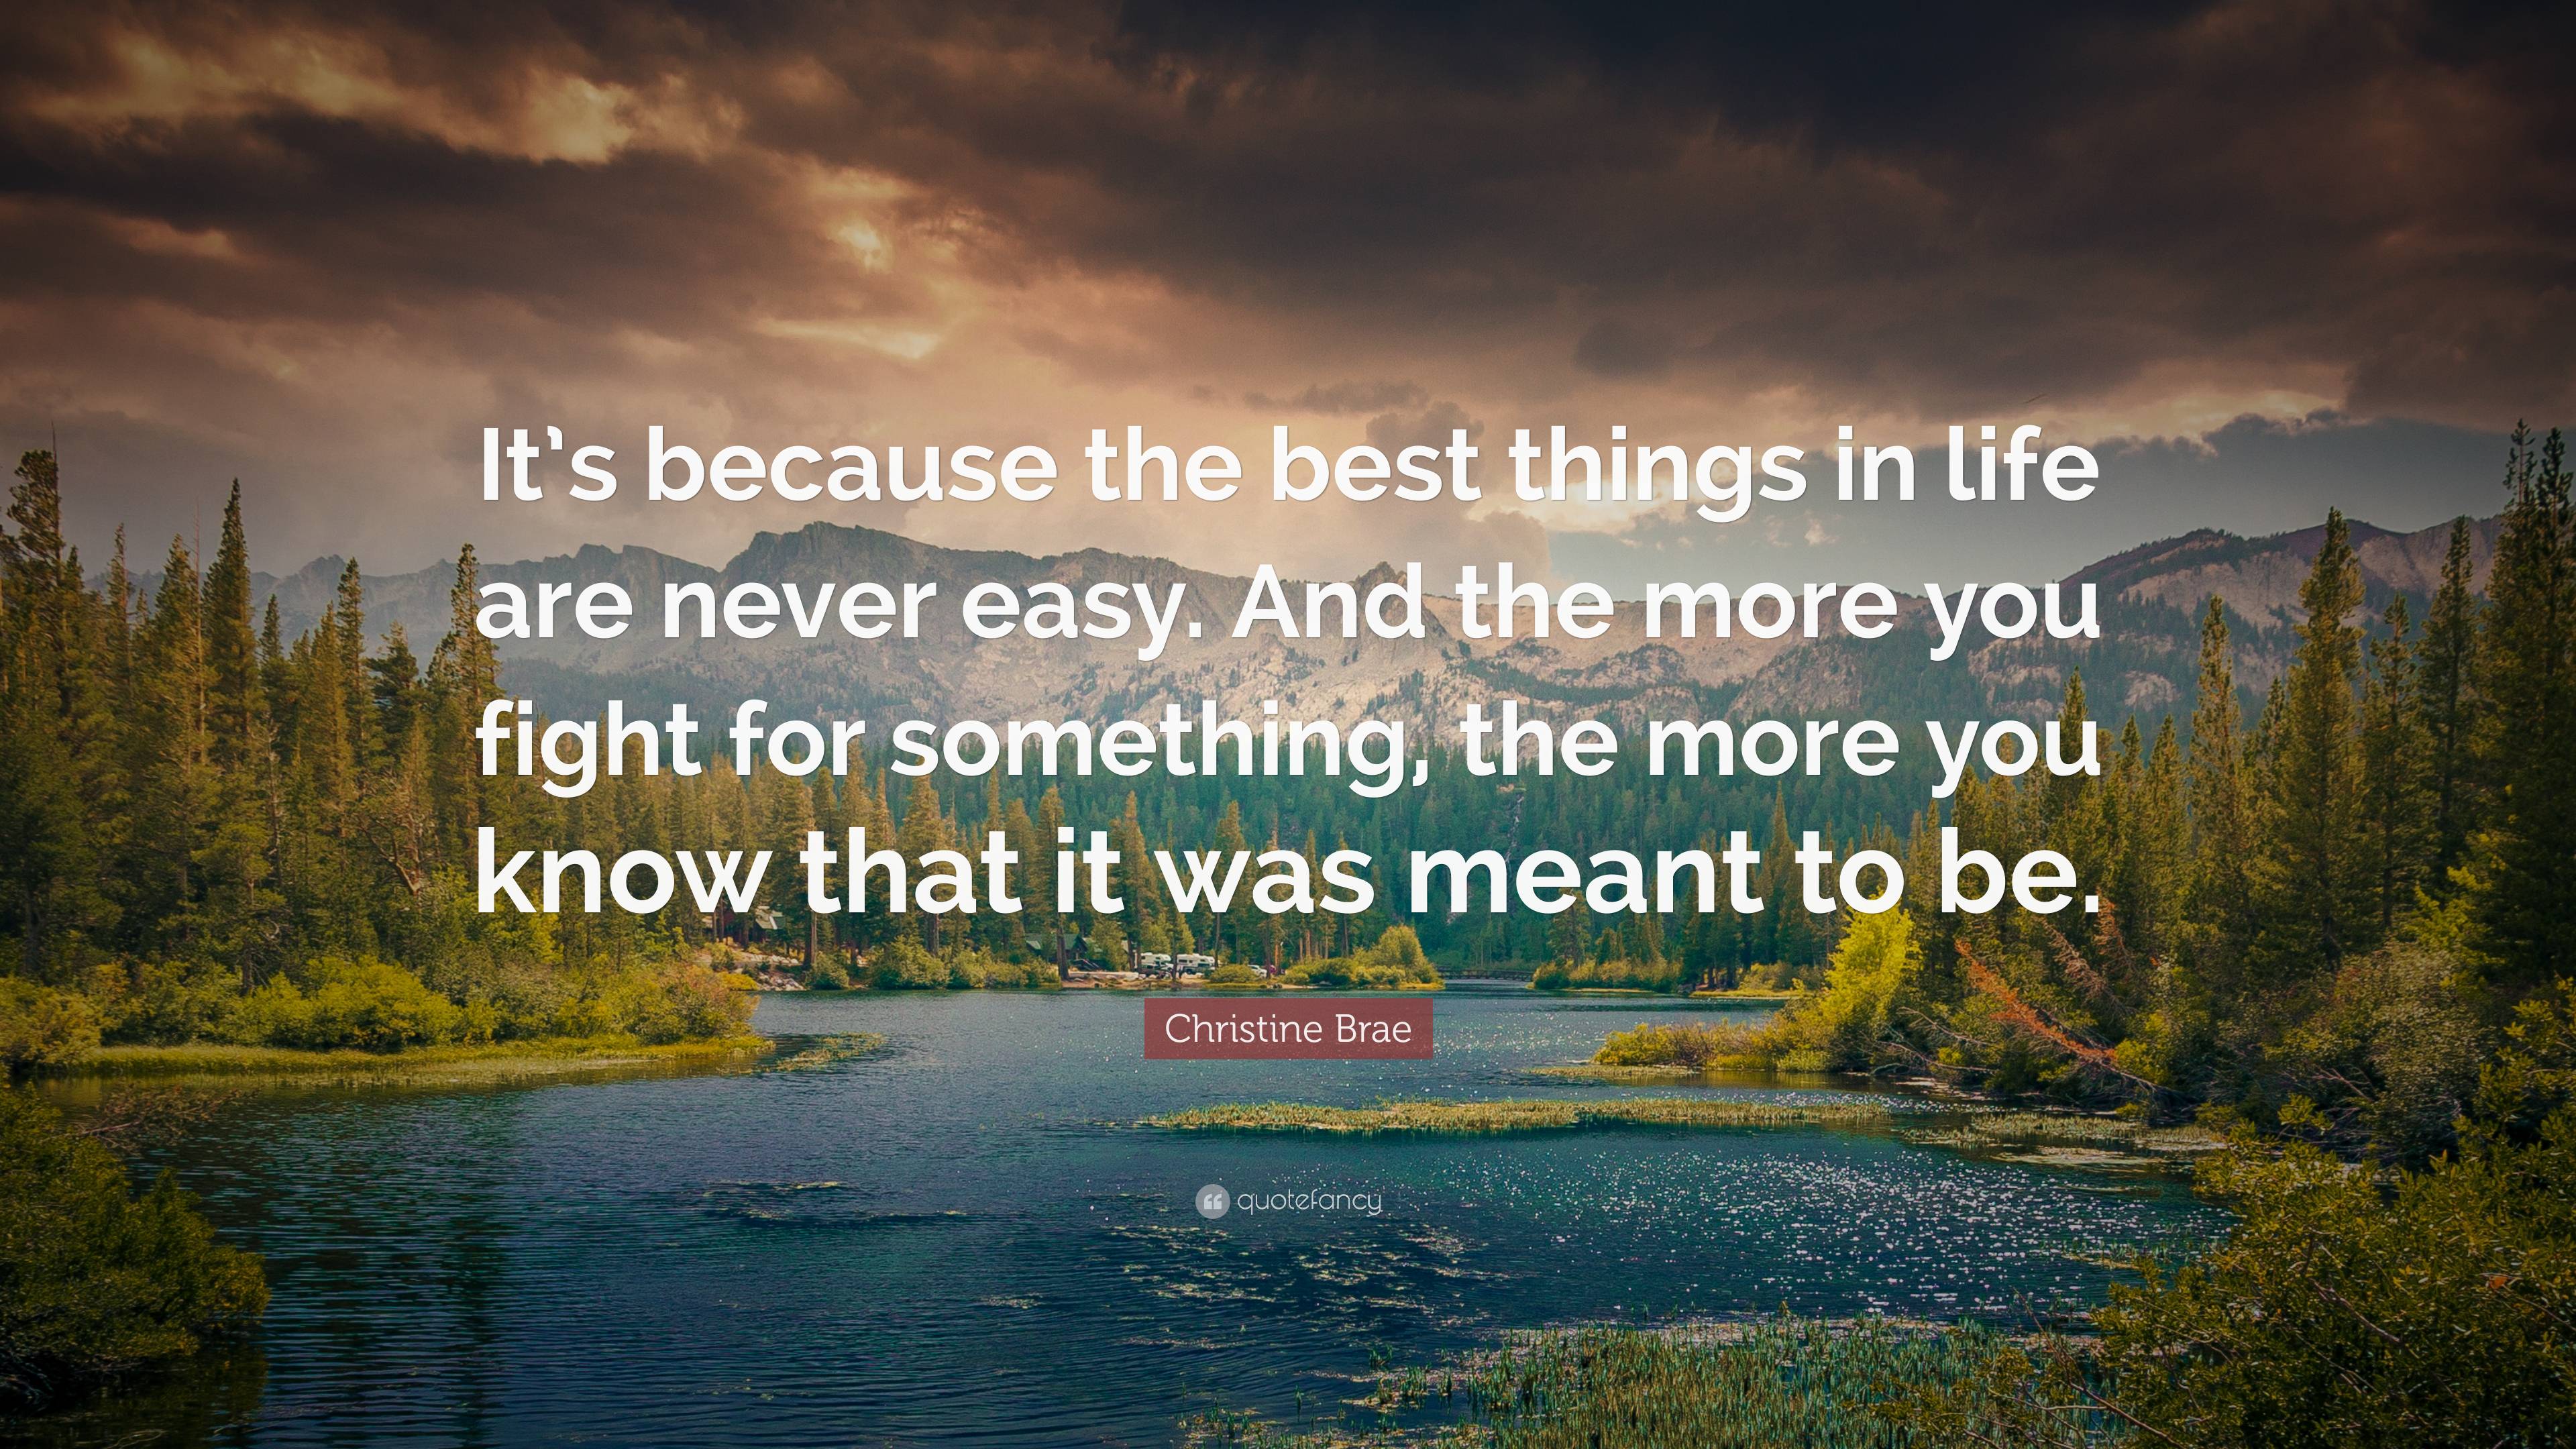 Christine Brae Quote: “It’s because the best things in life are never ...